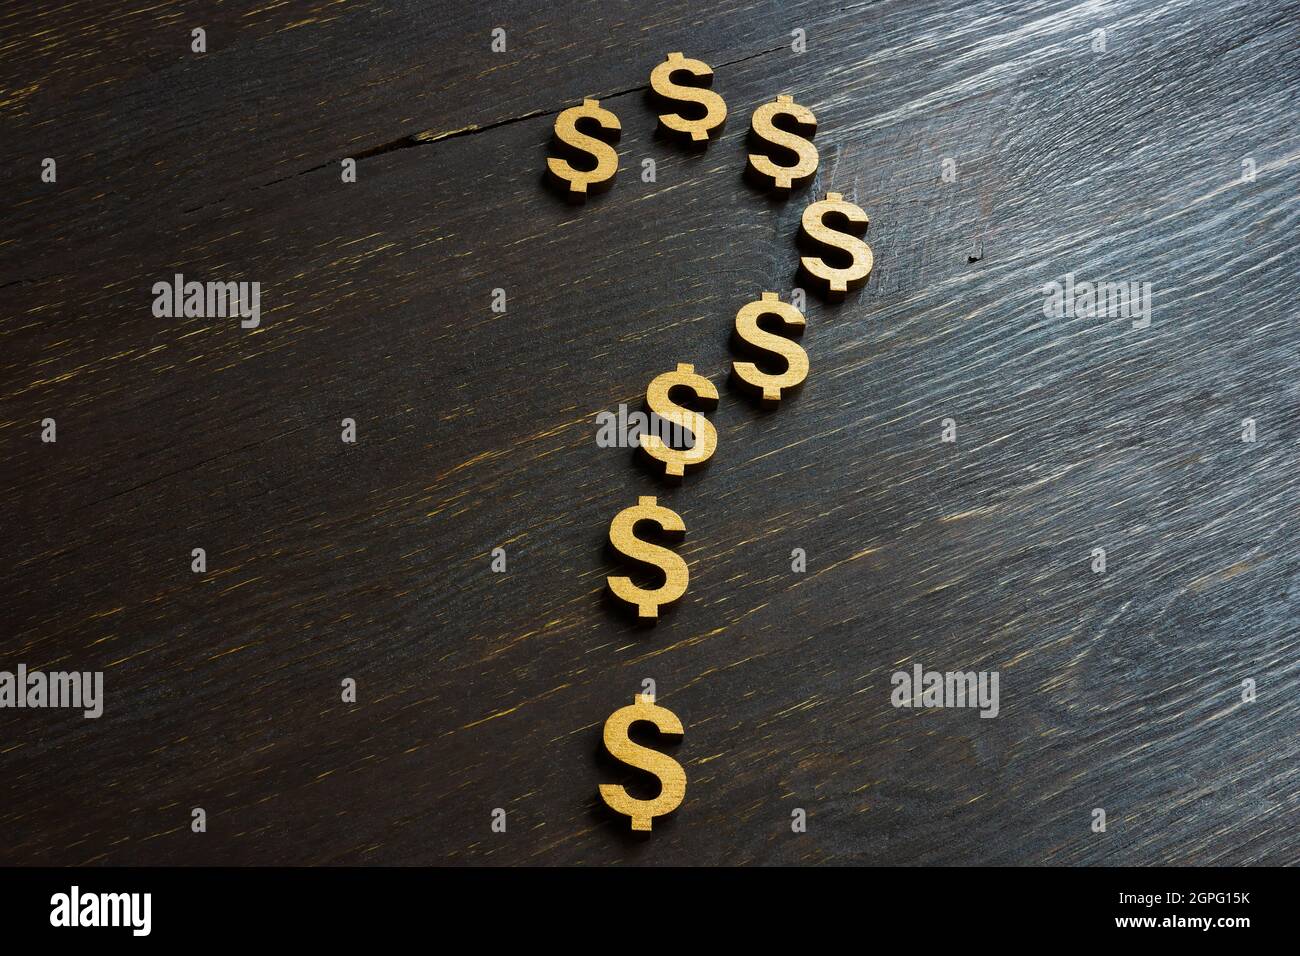 Business uncertainty in trading. A question mark made from dollar signs. Stock Photo